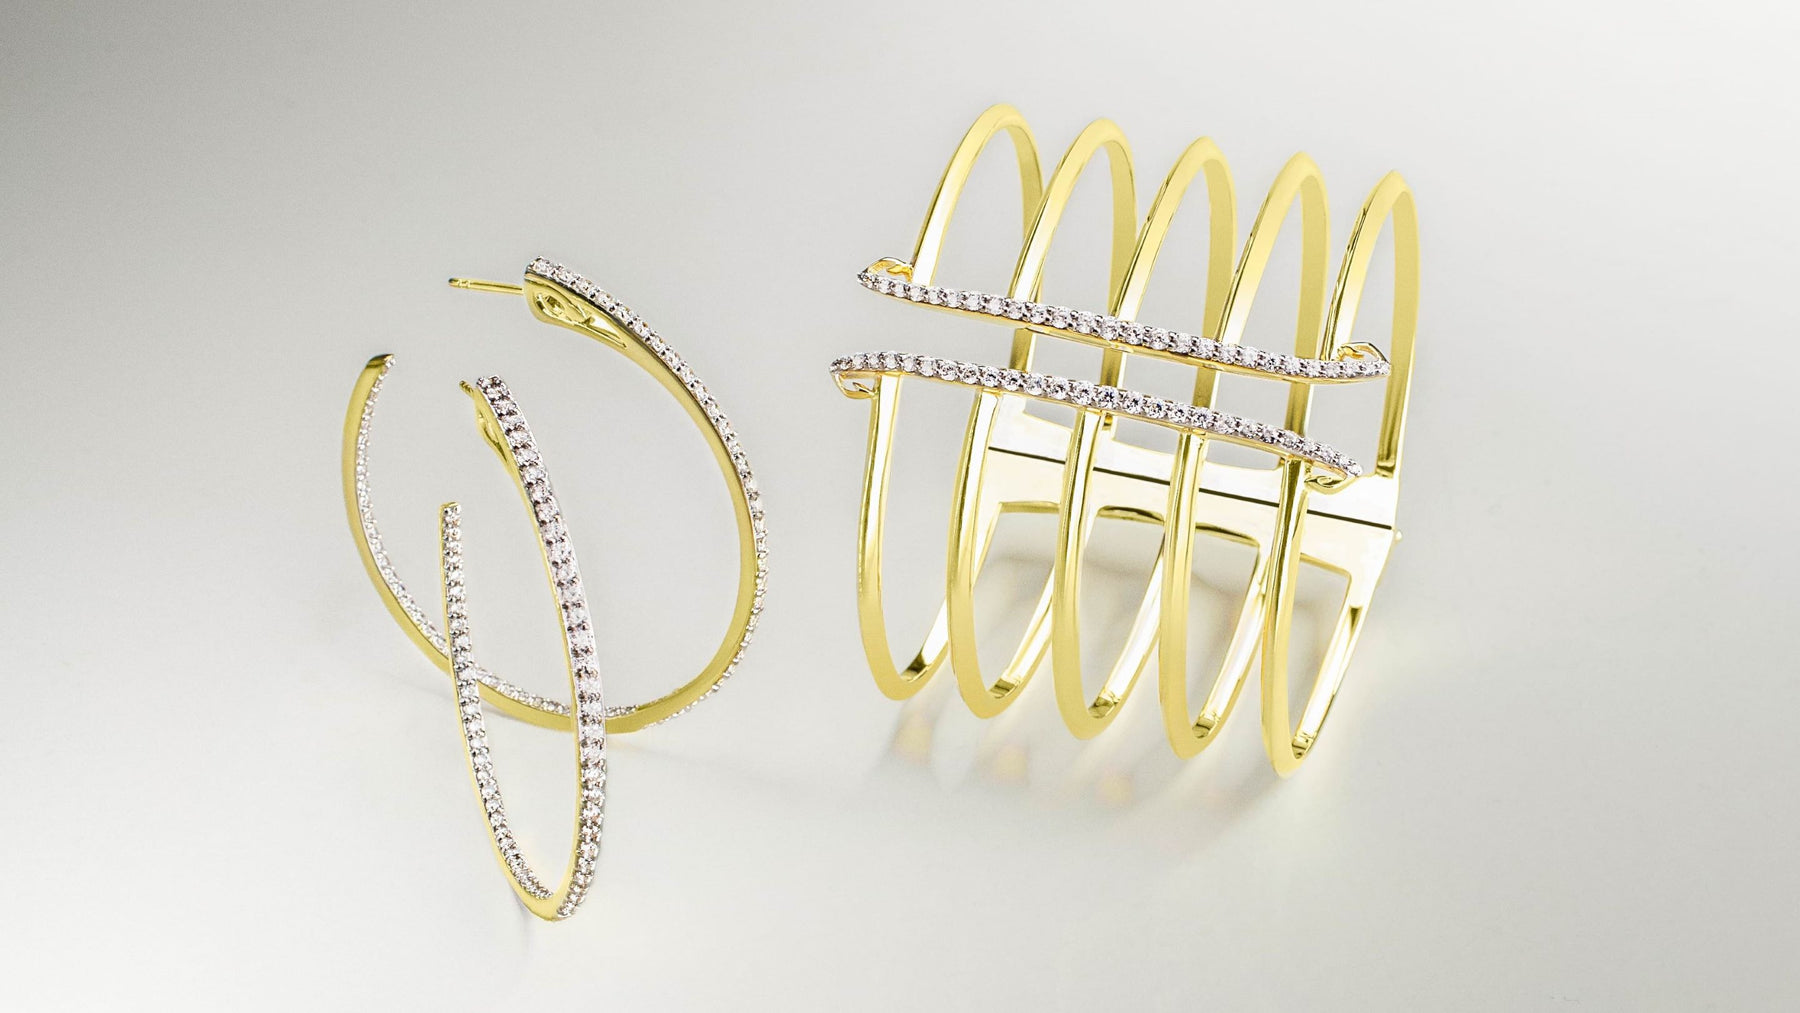 As seen on the Drew Barrymore Show: hoop earrings and corset cuff bracelet in 18K Gold Vermeil and white cz